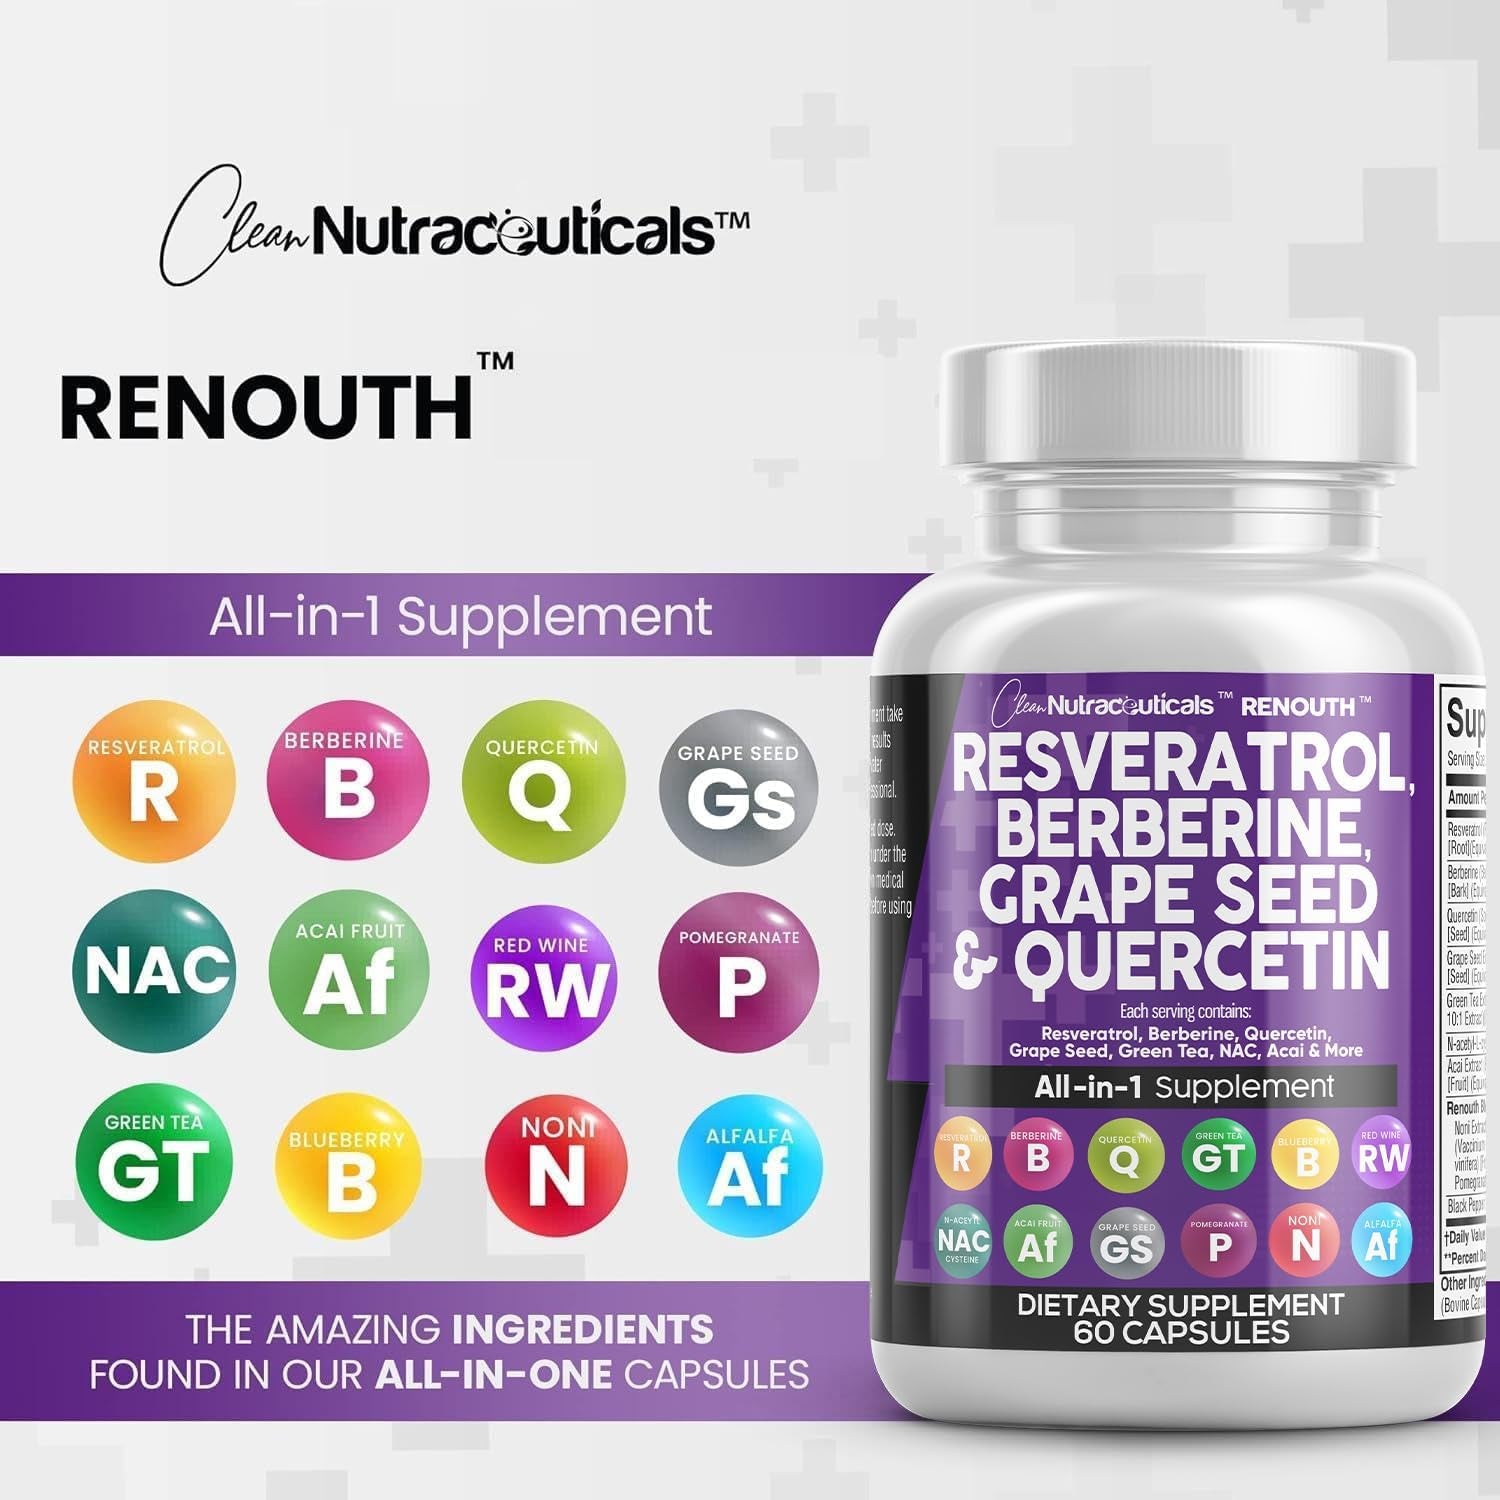 Resveratrol 6000Mg Berberine 3000Mg Grape Seed Extract 3000Mg Quercetin 4000Mg Green Tea Extract - Polyphenol Supplement for Women and Men with N-Acetyl Cysteine, Acai Extract - 60 Capsules